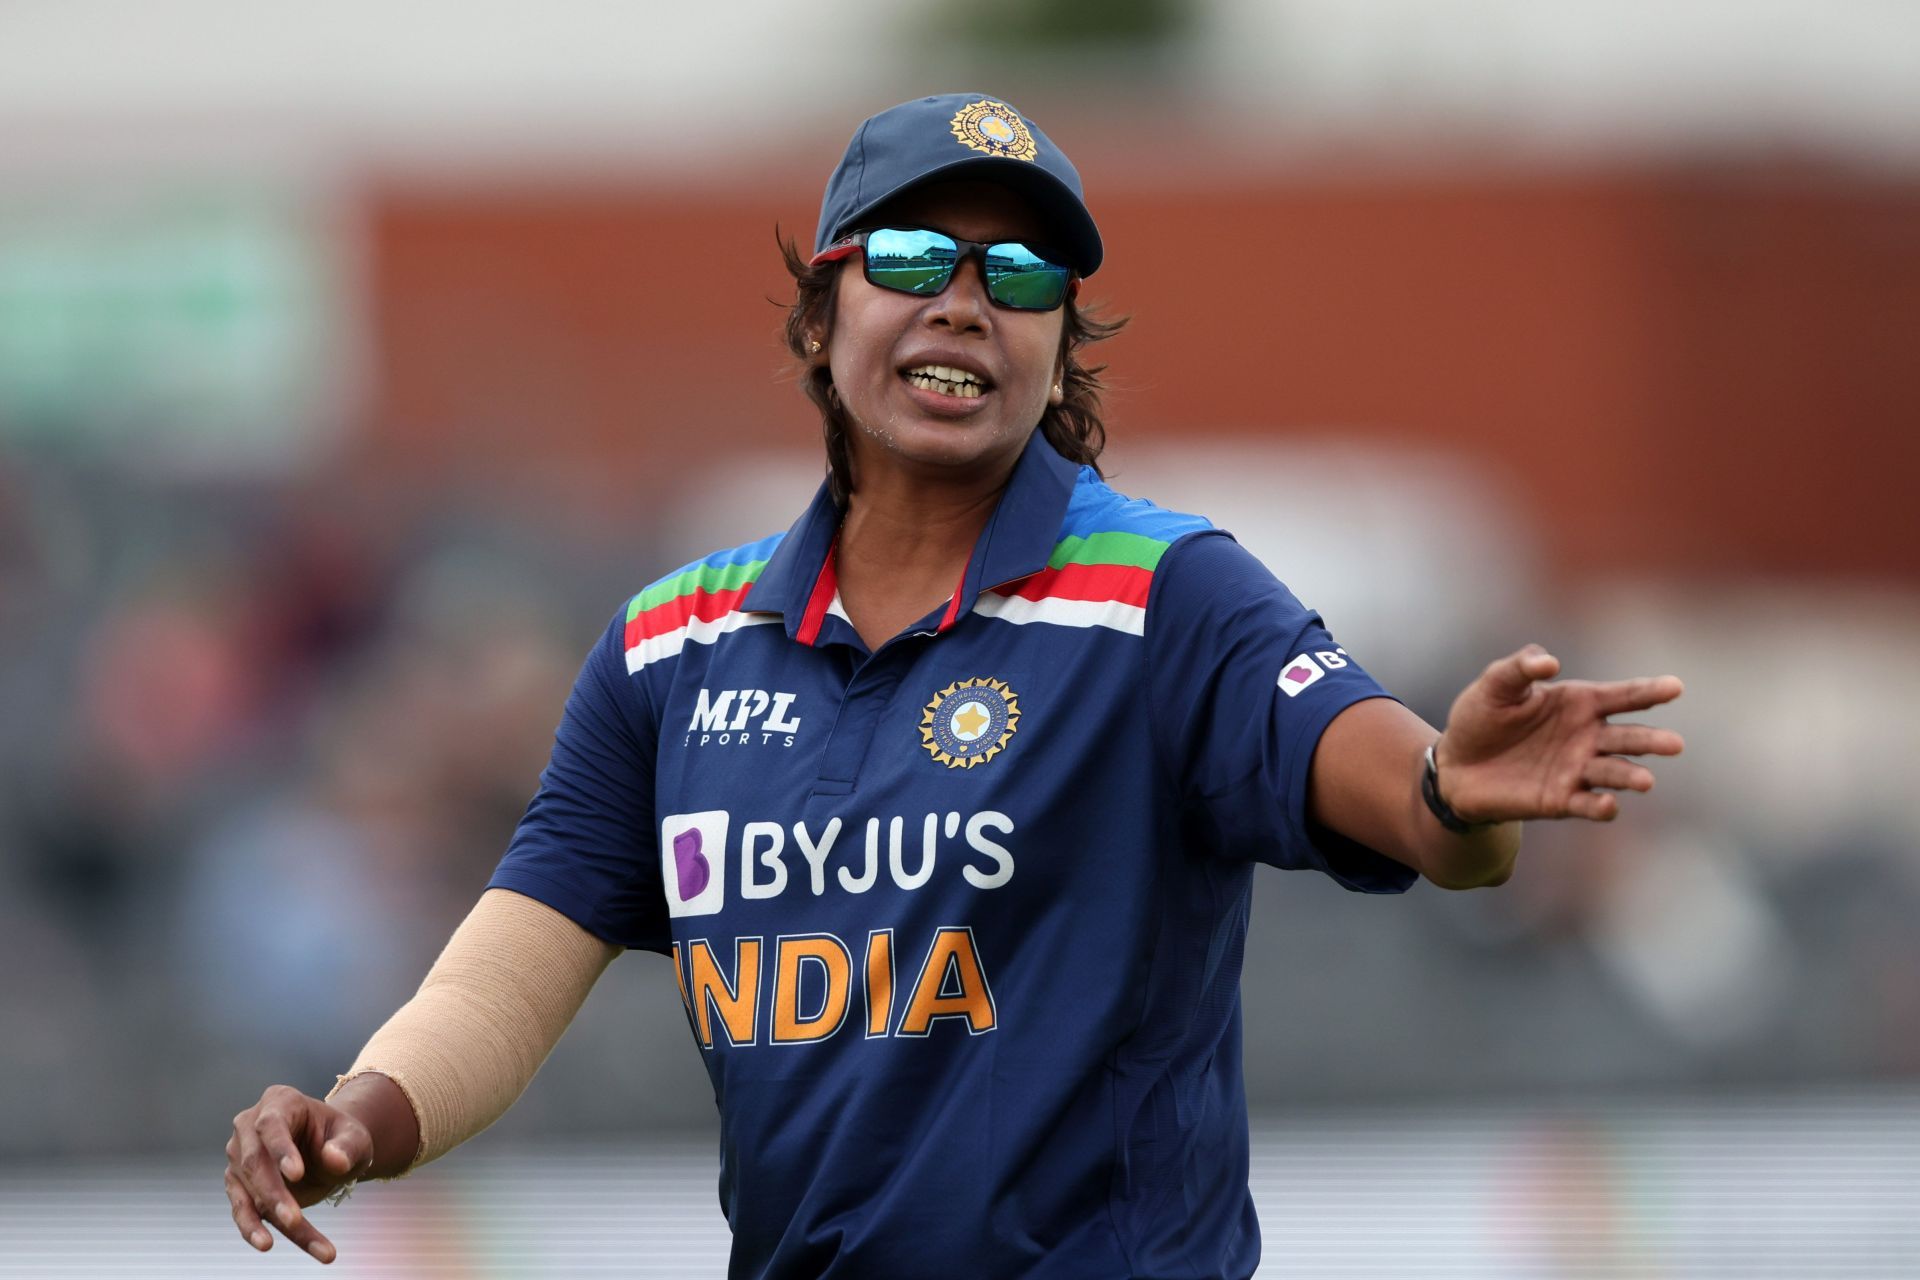 Jhulan Goswami to play her farewell match at Home of Cricket.